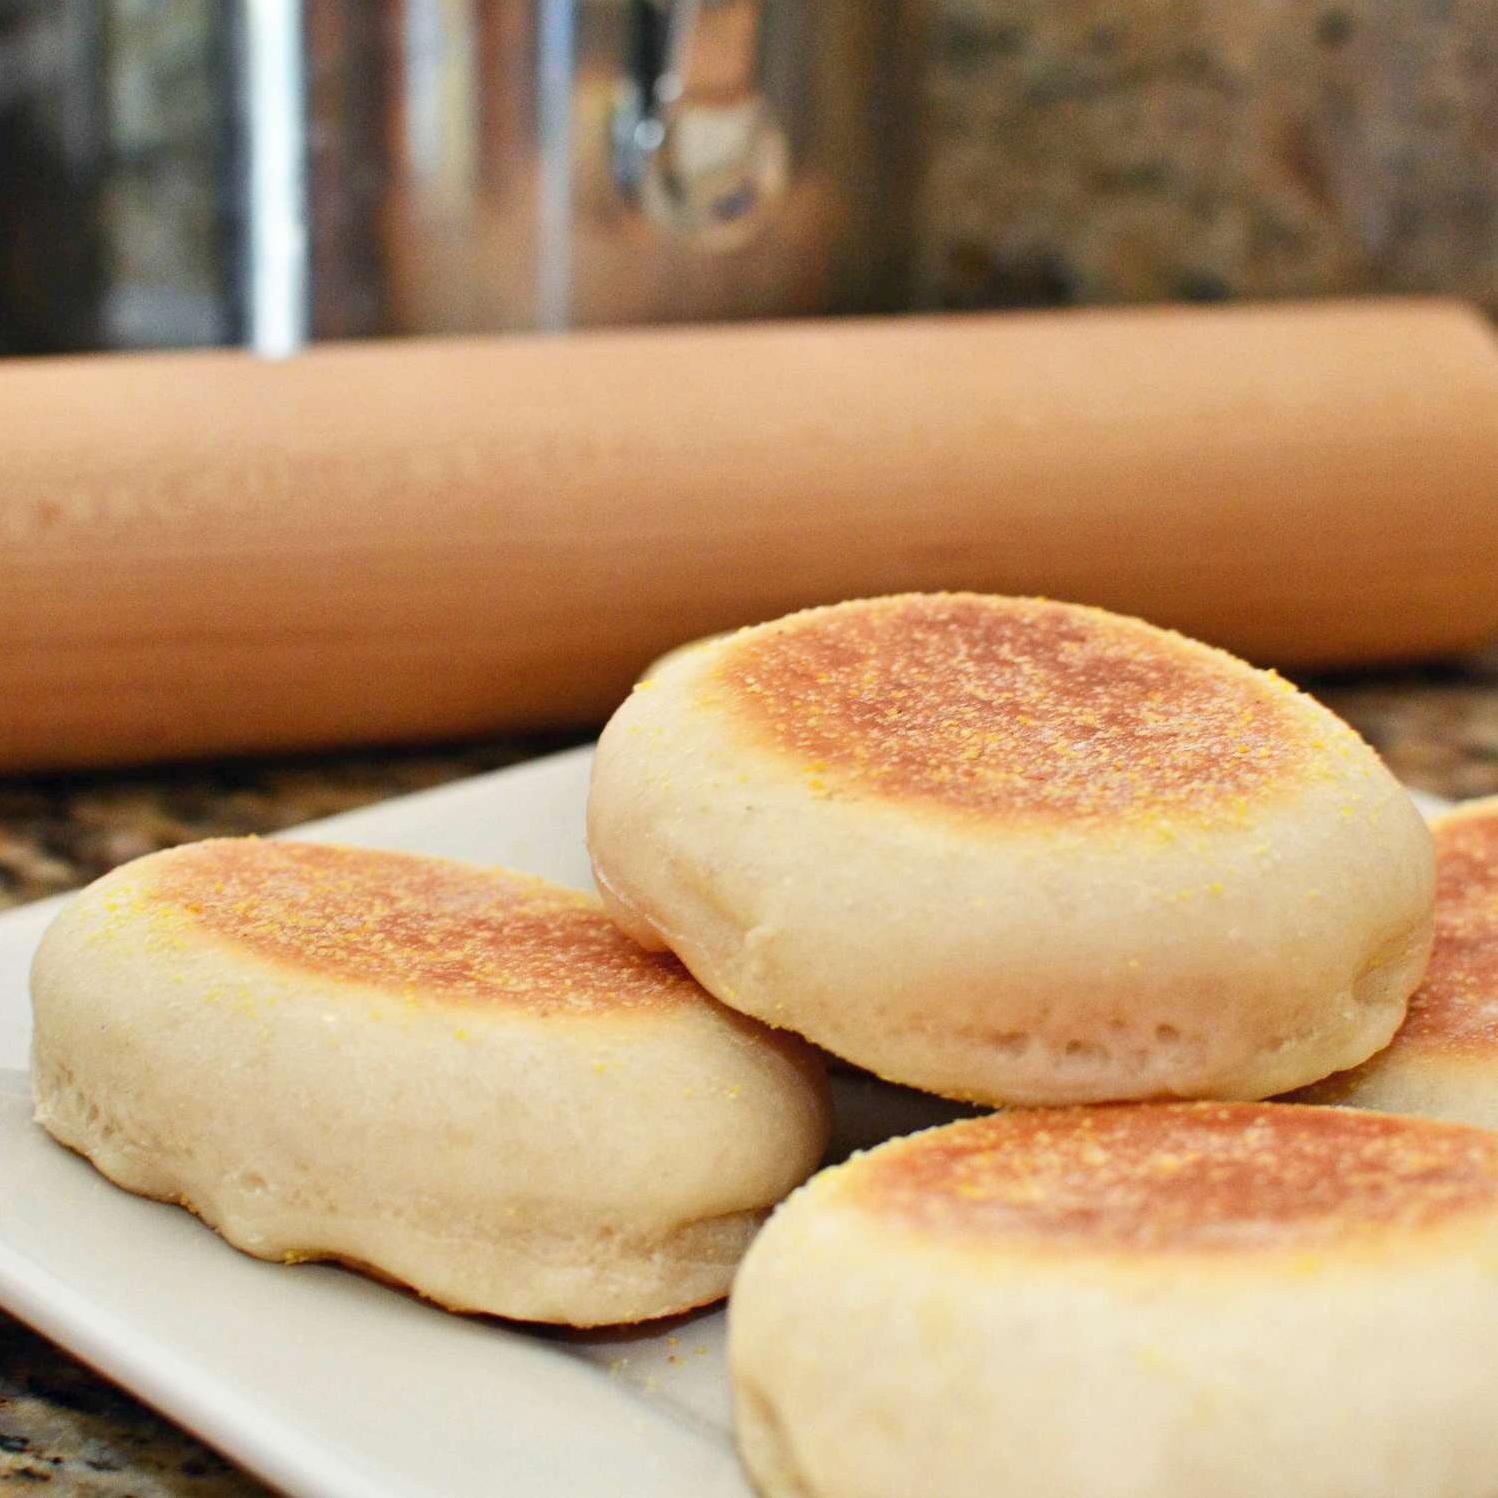  Hoping for a satisfying breakfast without leaving the house? These English muffins have got you covered.